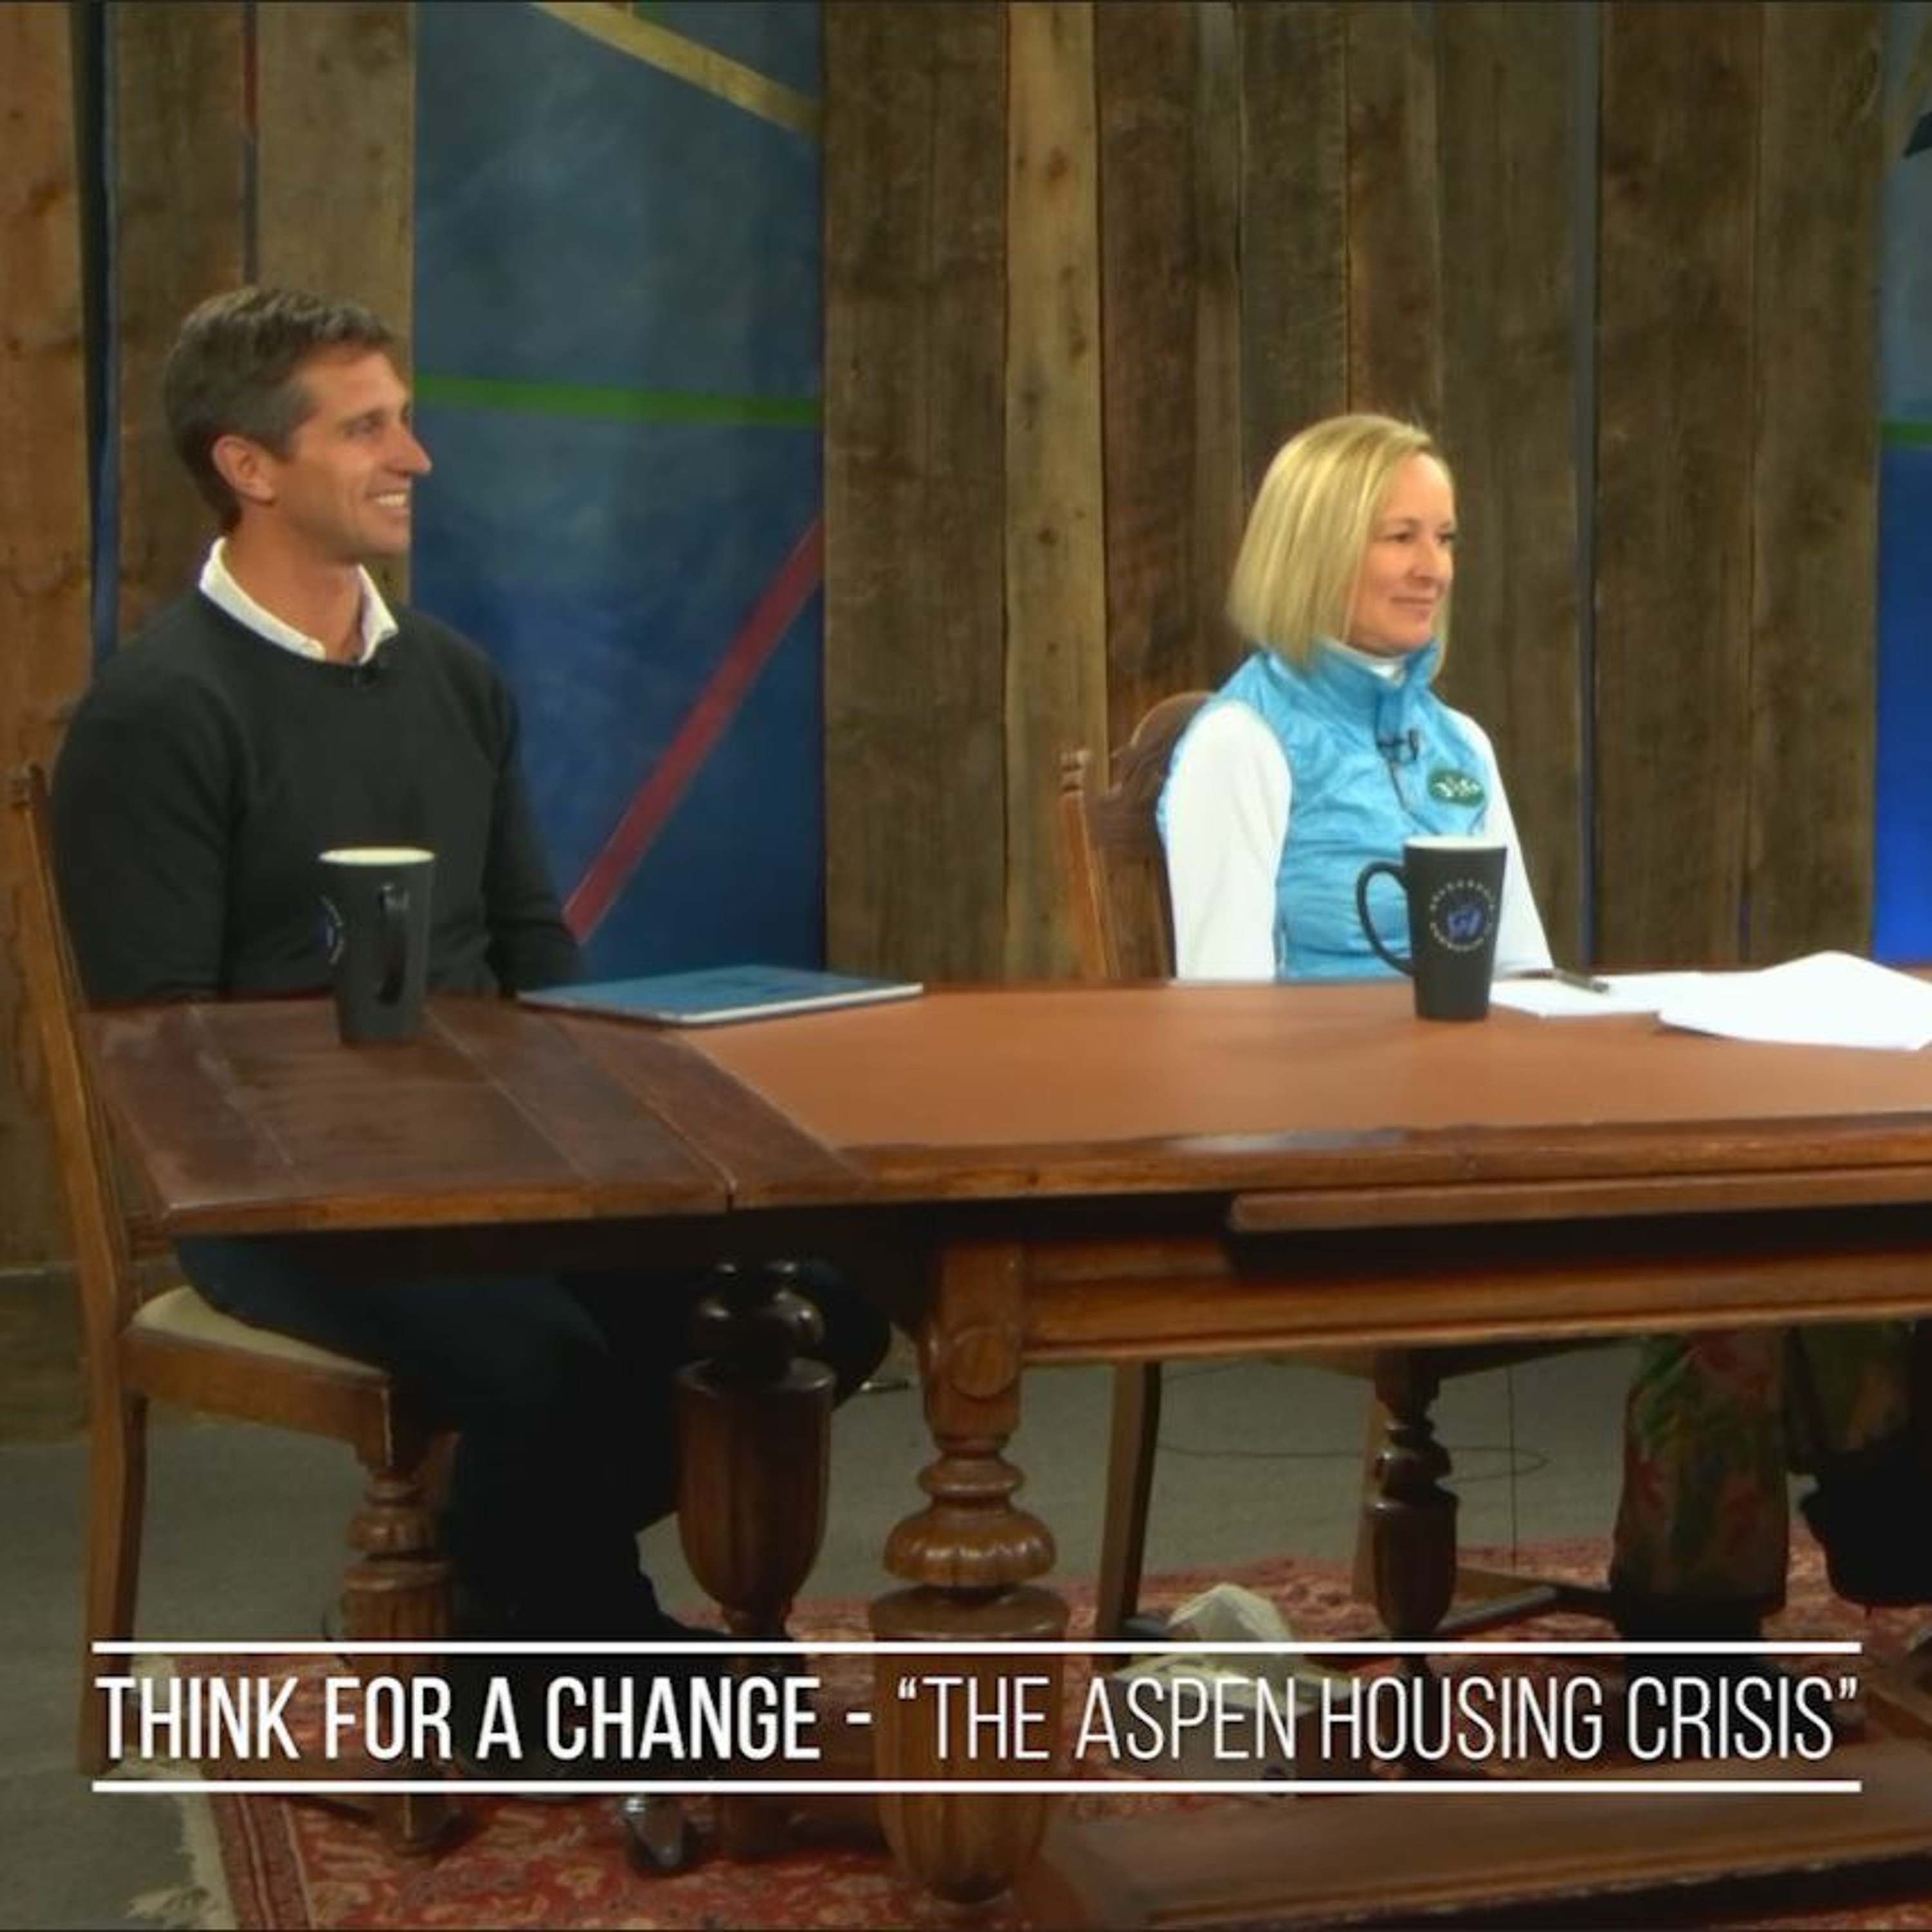 Think for a Change - ”The Aspen Housing Crisis”